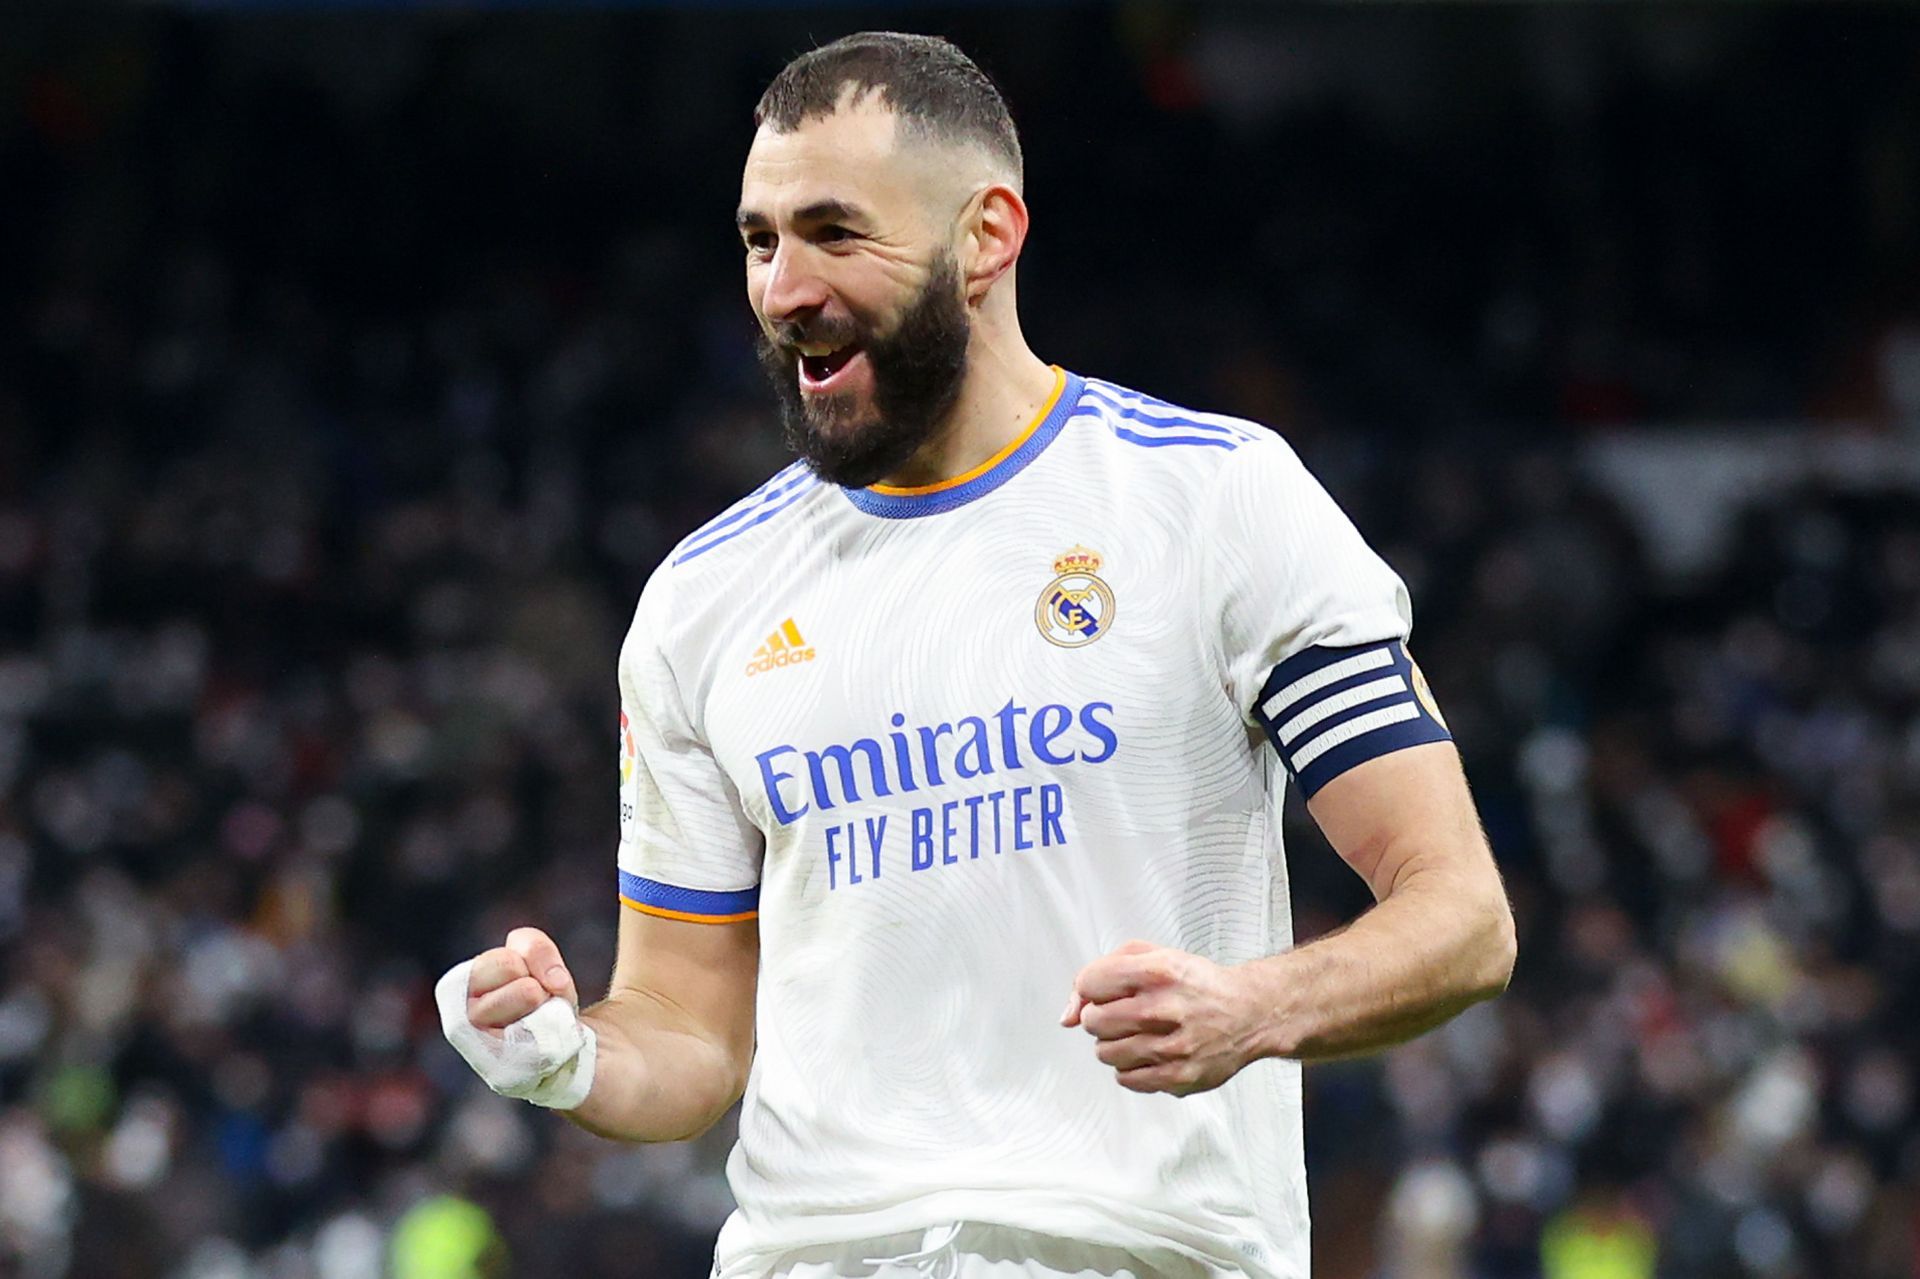 Karim Benzema is one of the longest-serving players at Real Madrid.